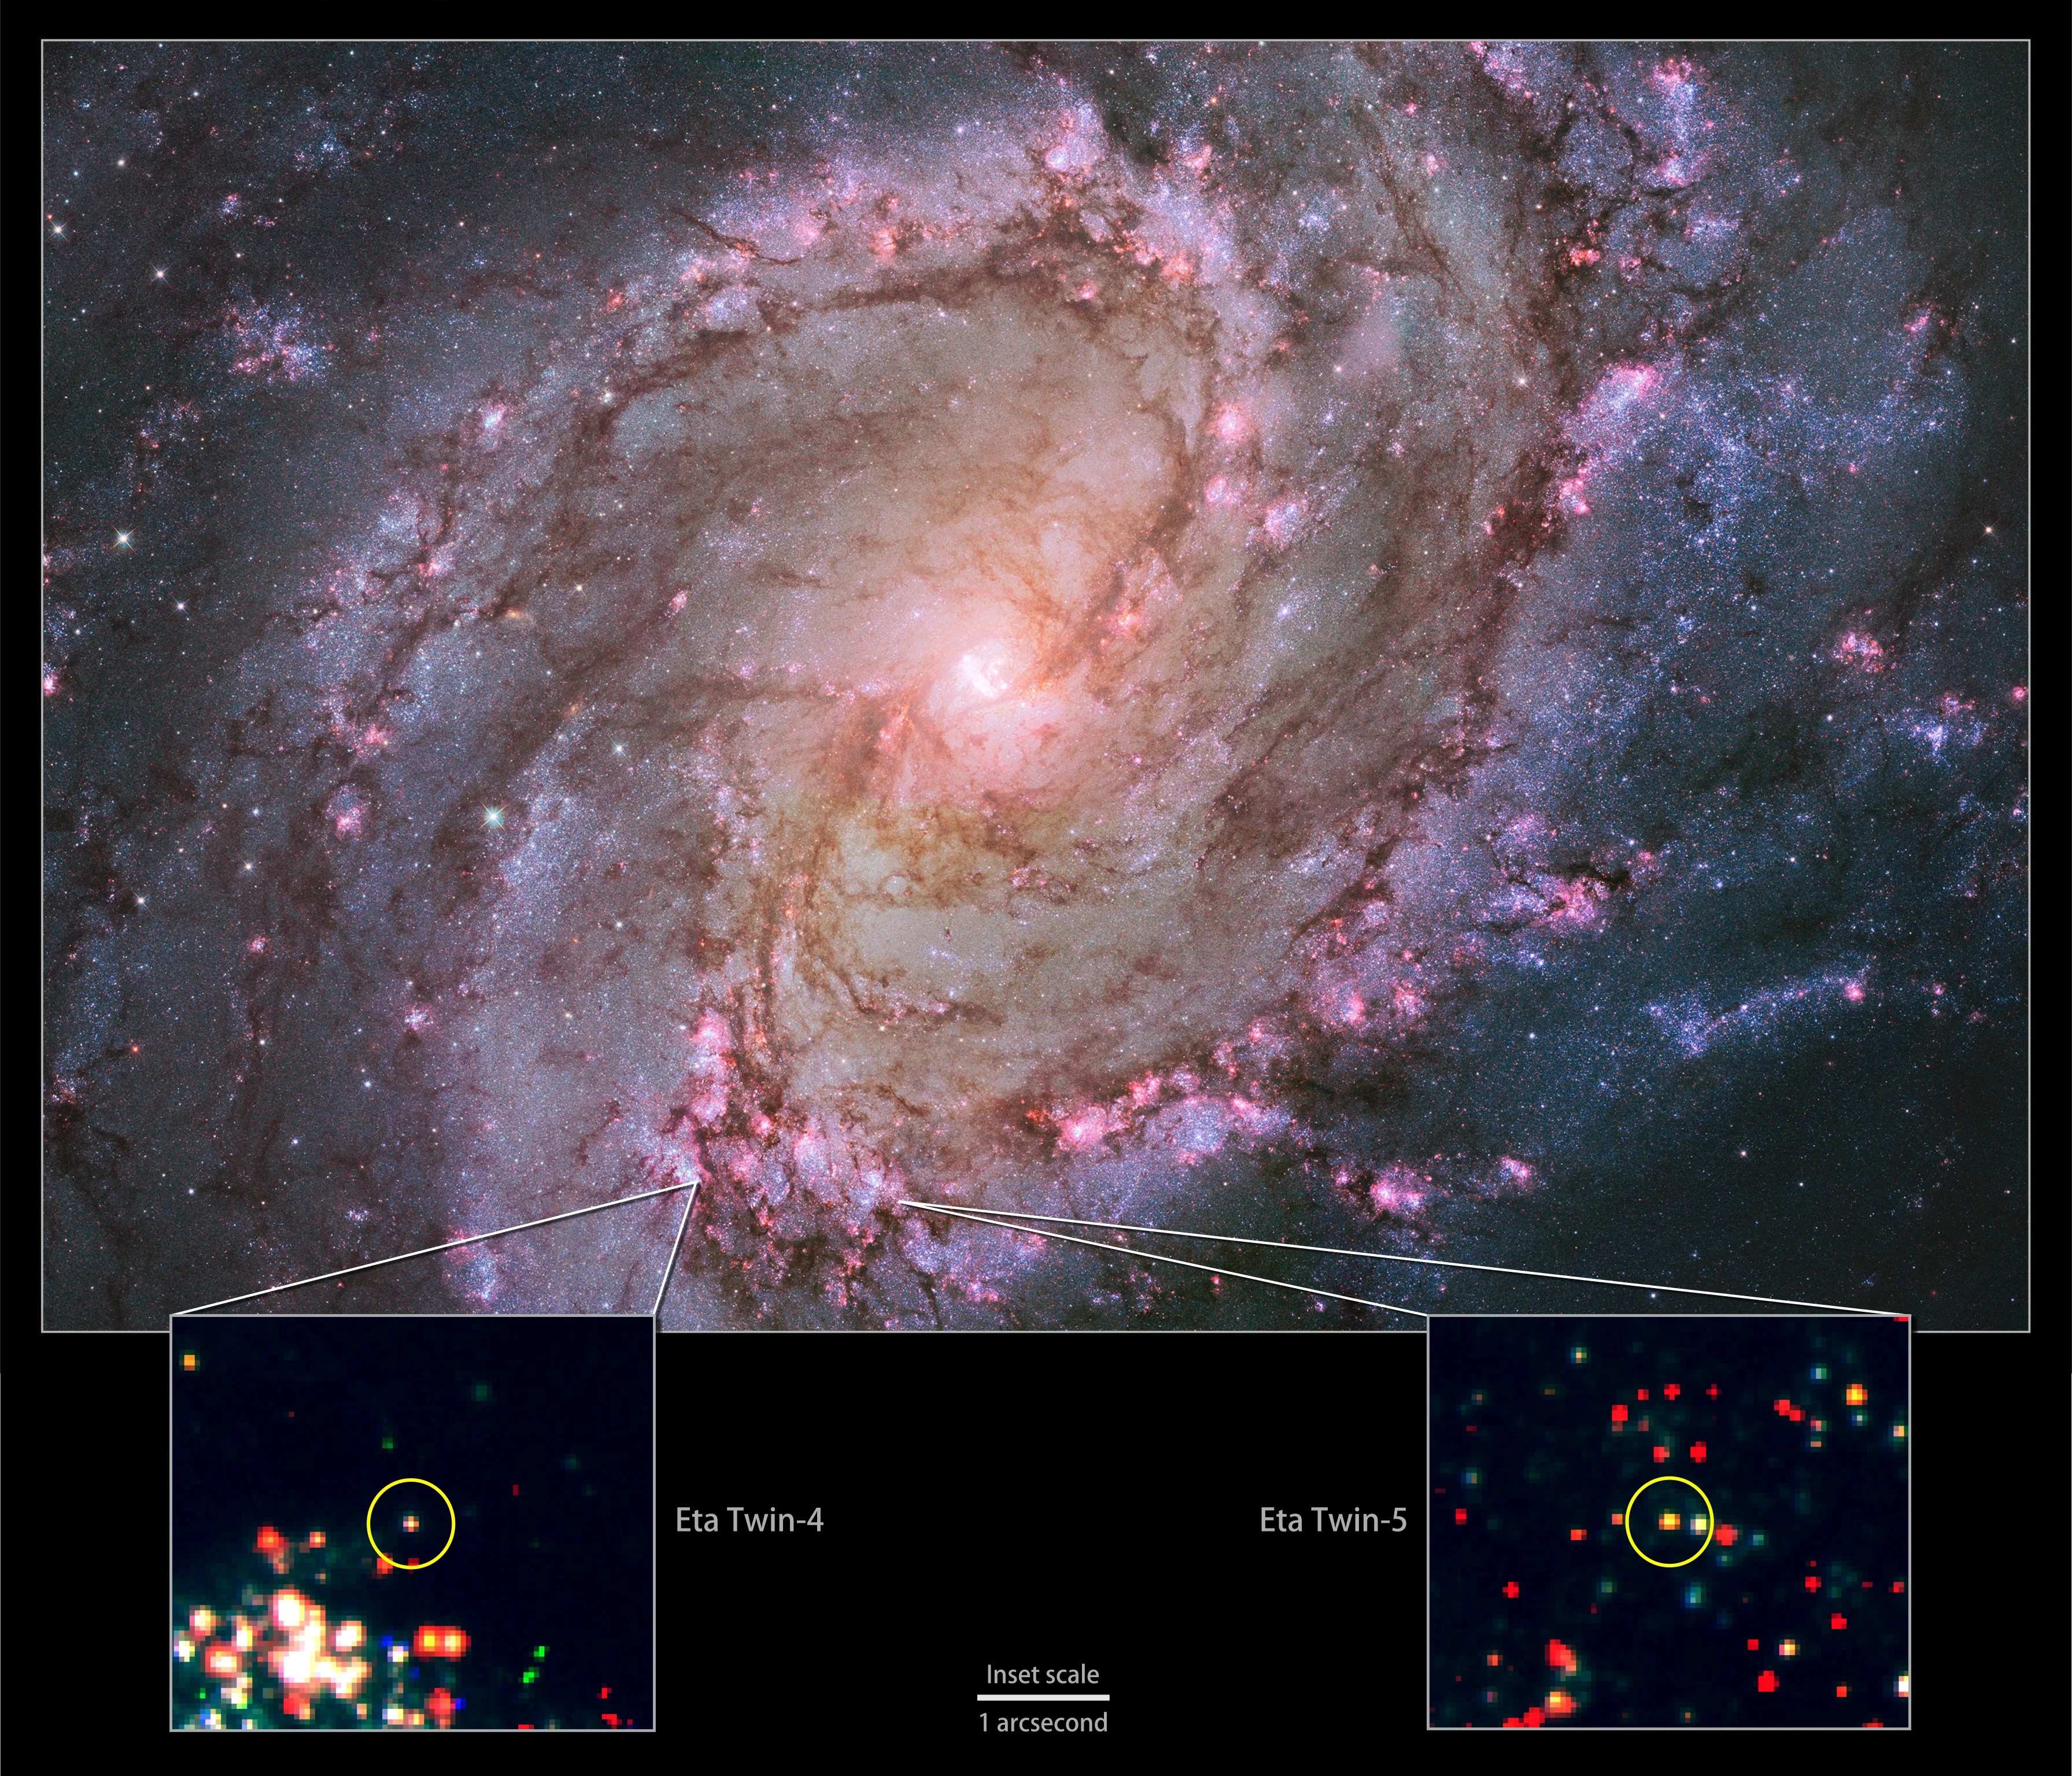 A spiral galaxy with callout boxes highlighting the location of Eta Carinae "twins." Images on the bottom zoom into the twin stars.